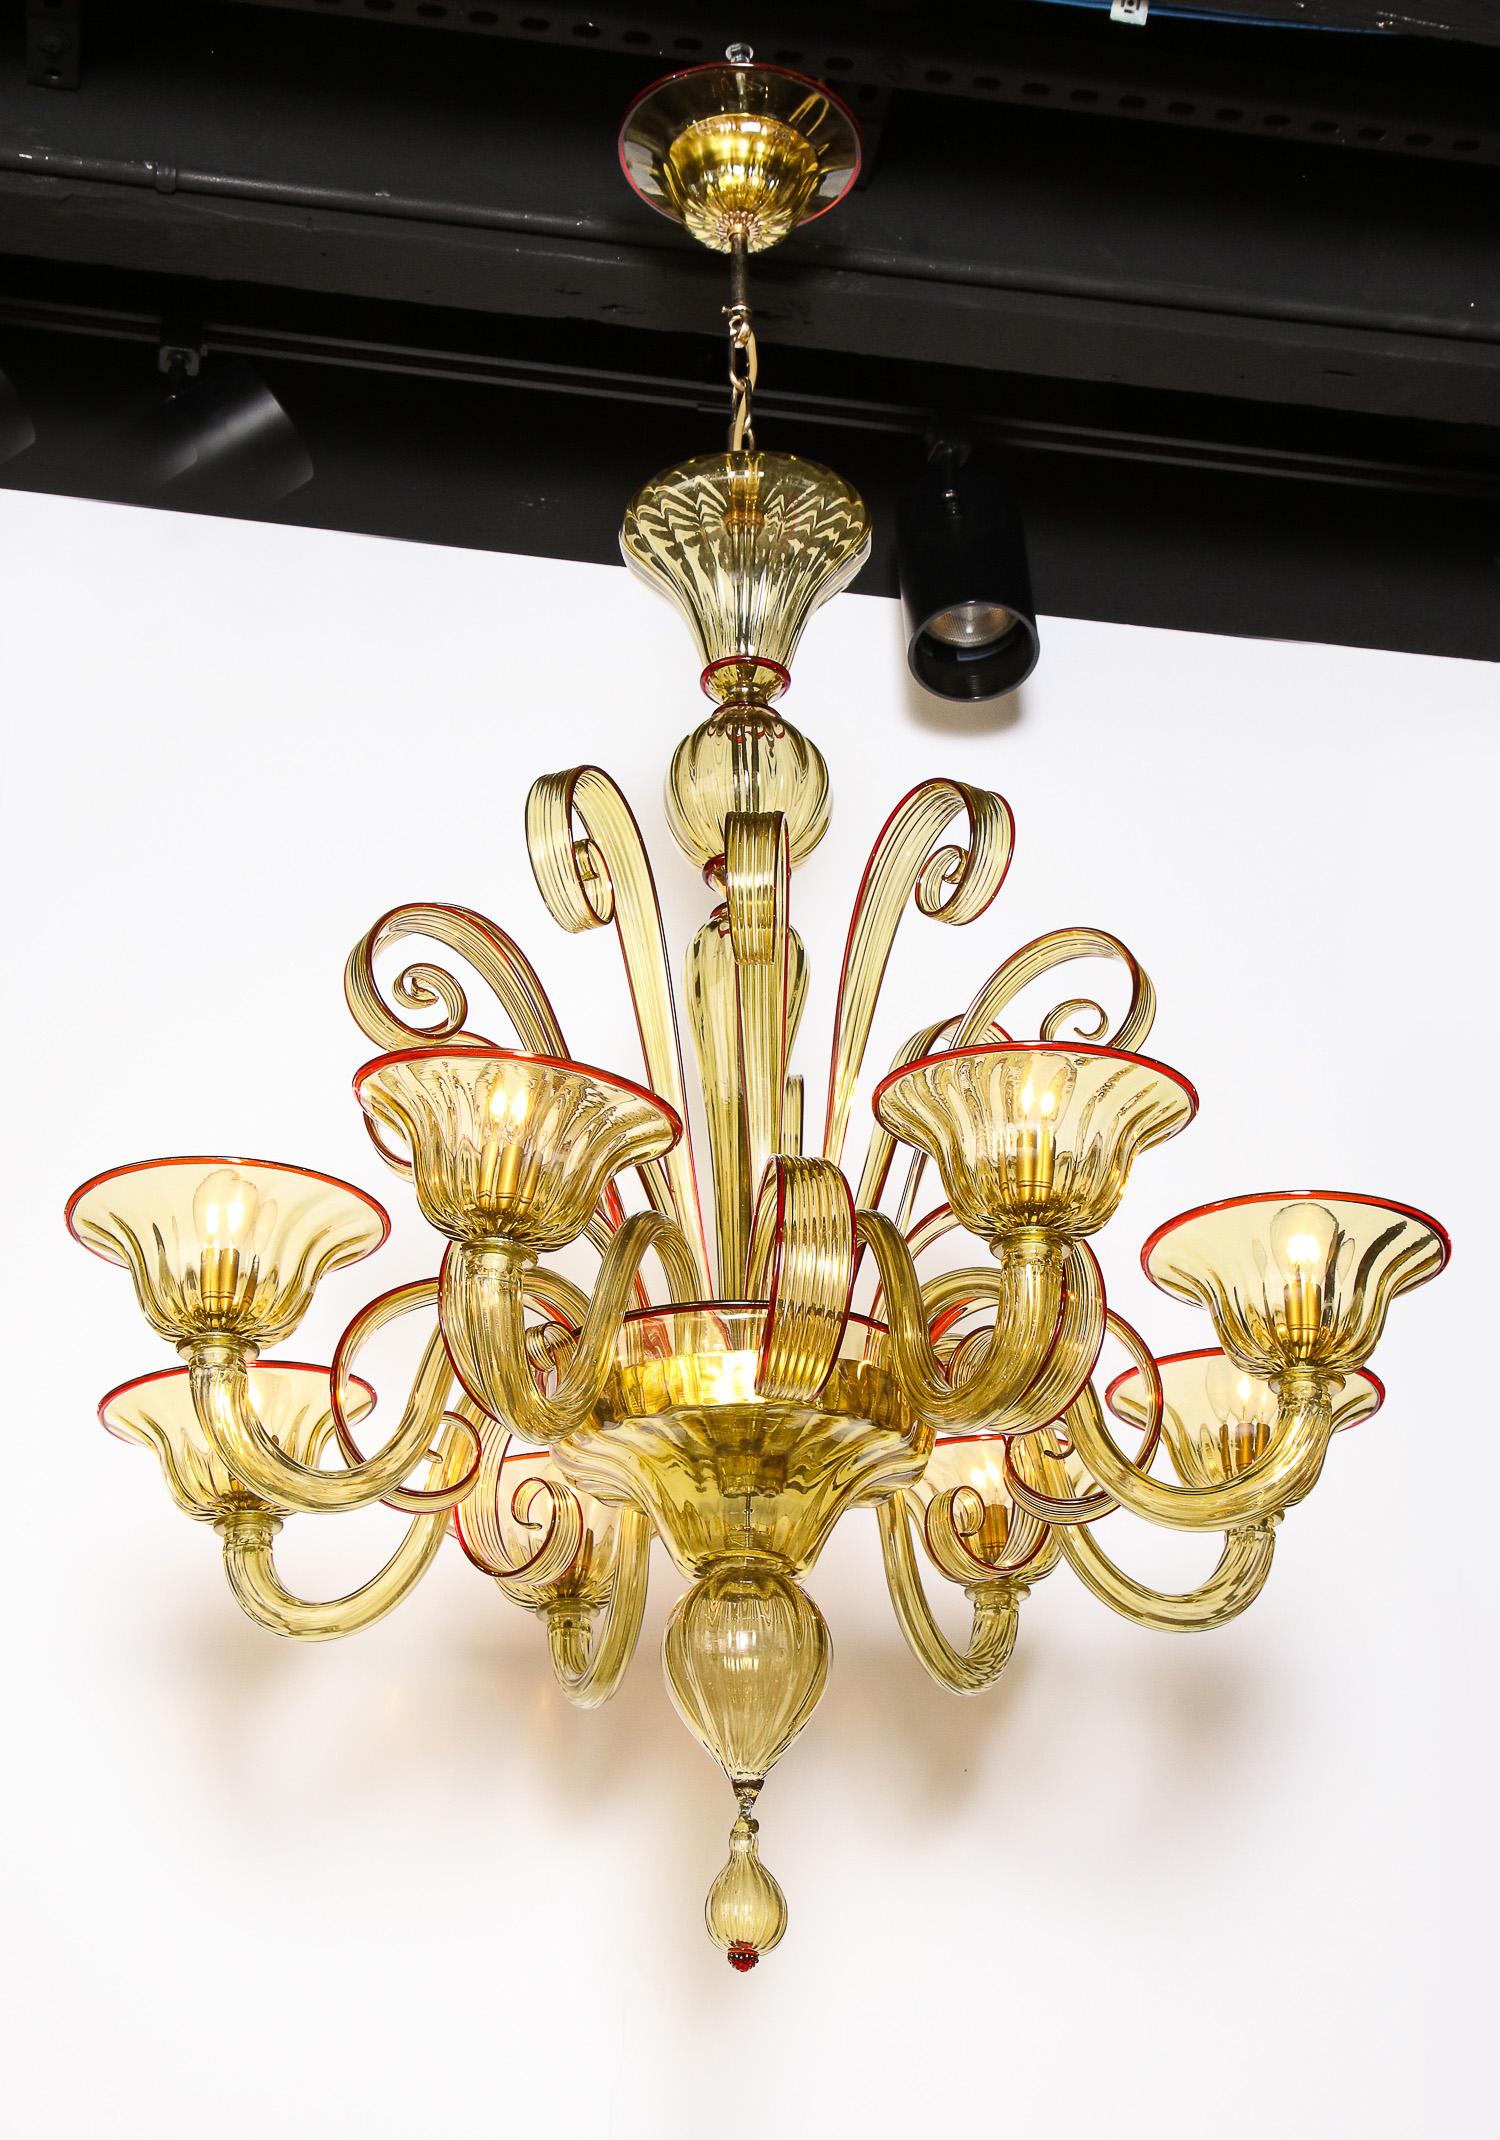 Art Nouveau Venetian Glass Chandelier, Amber Color/Red, Contemporary, 8 Arms, Murano, Italy For Sale